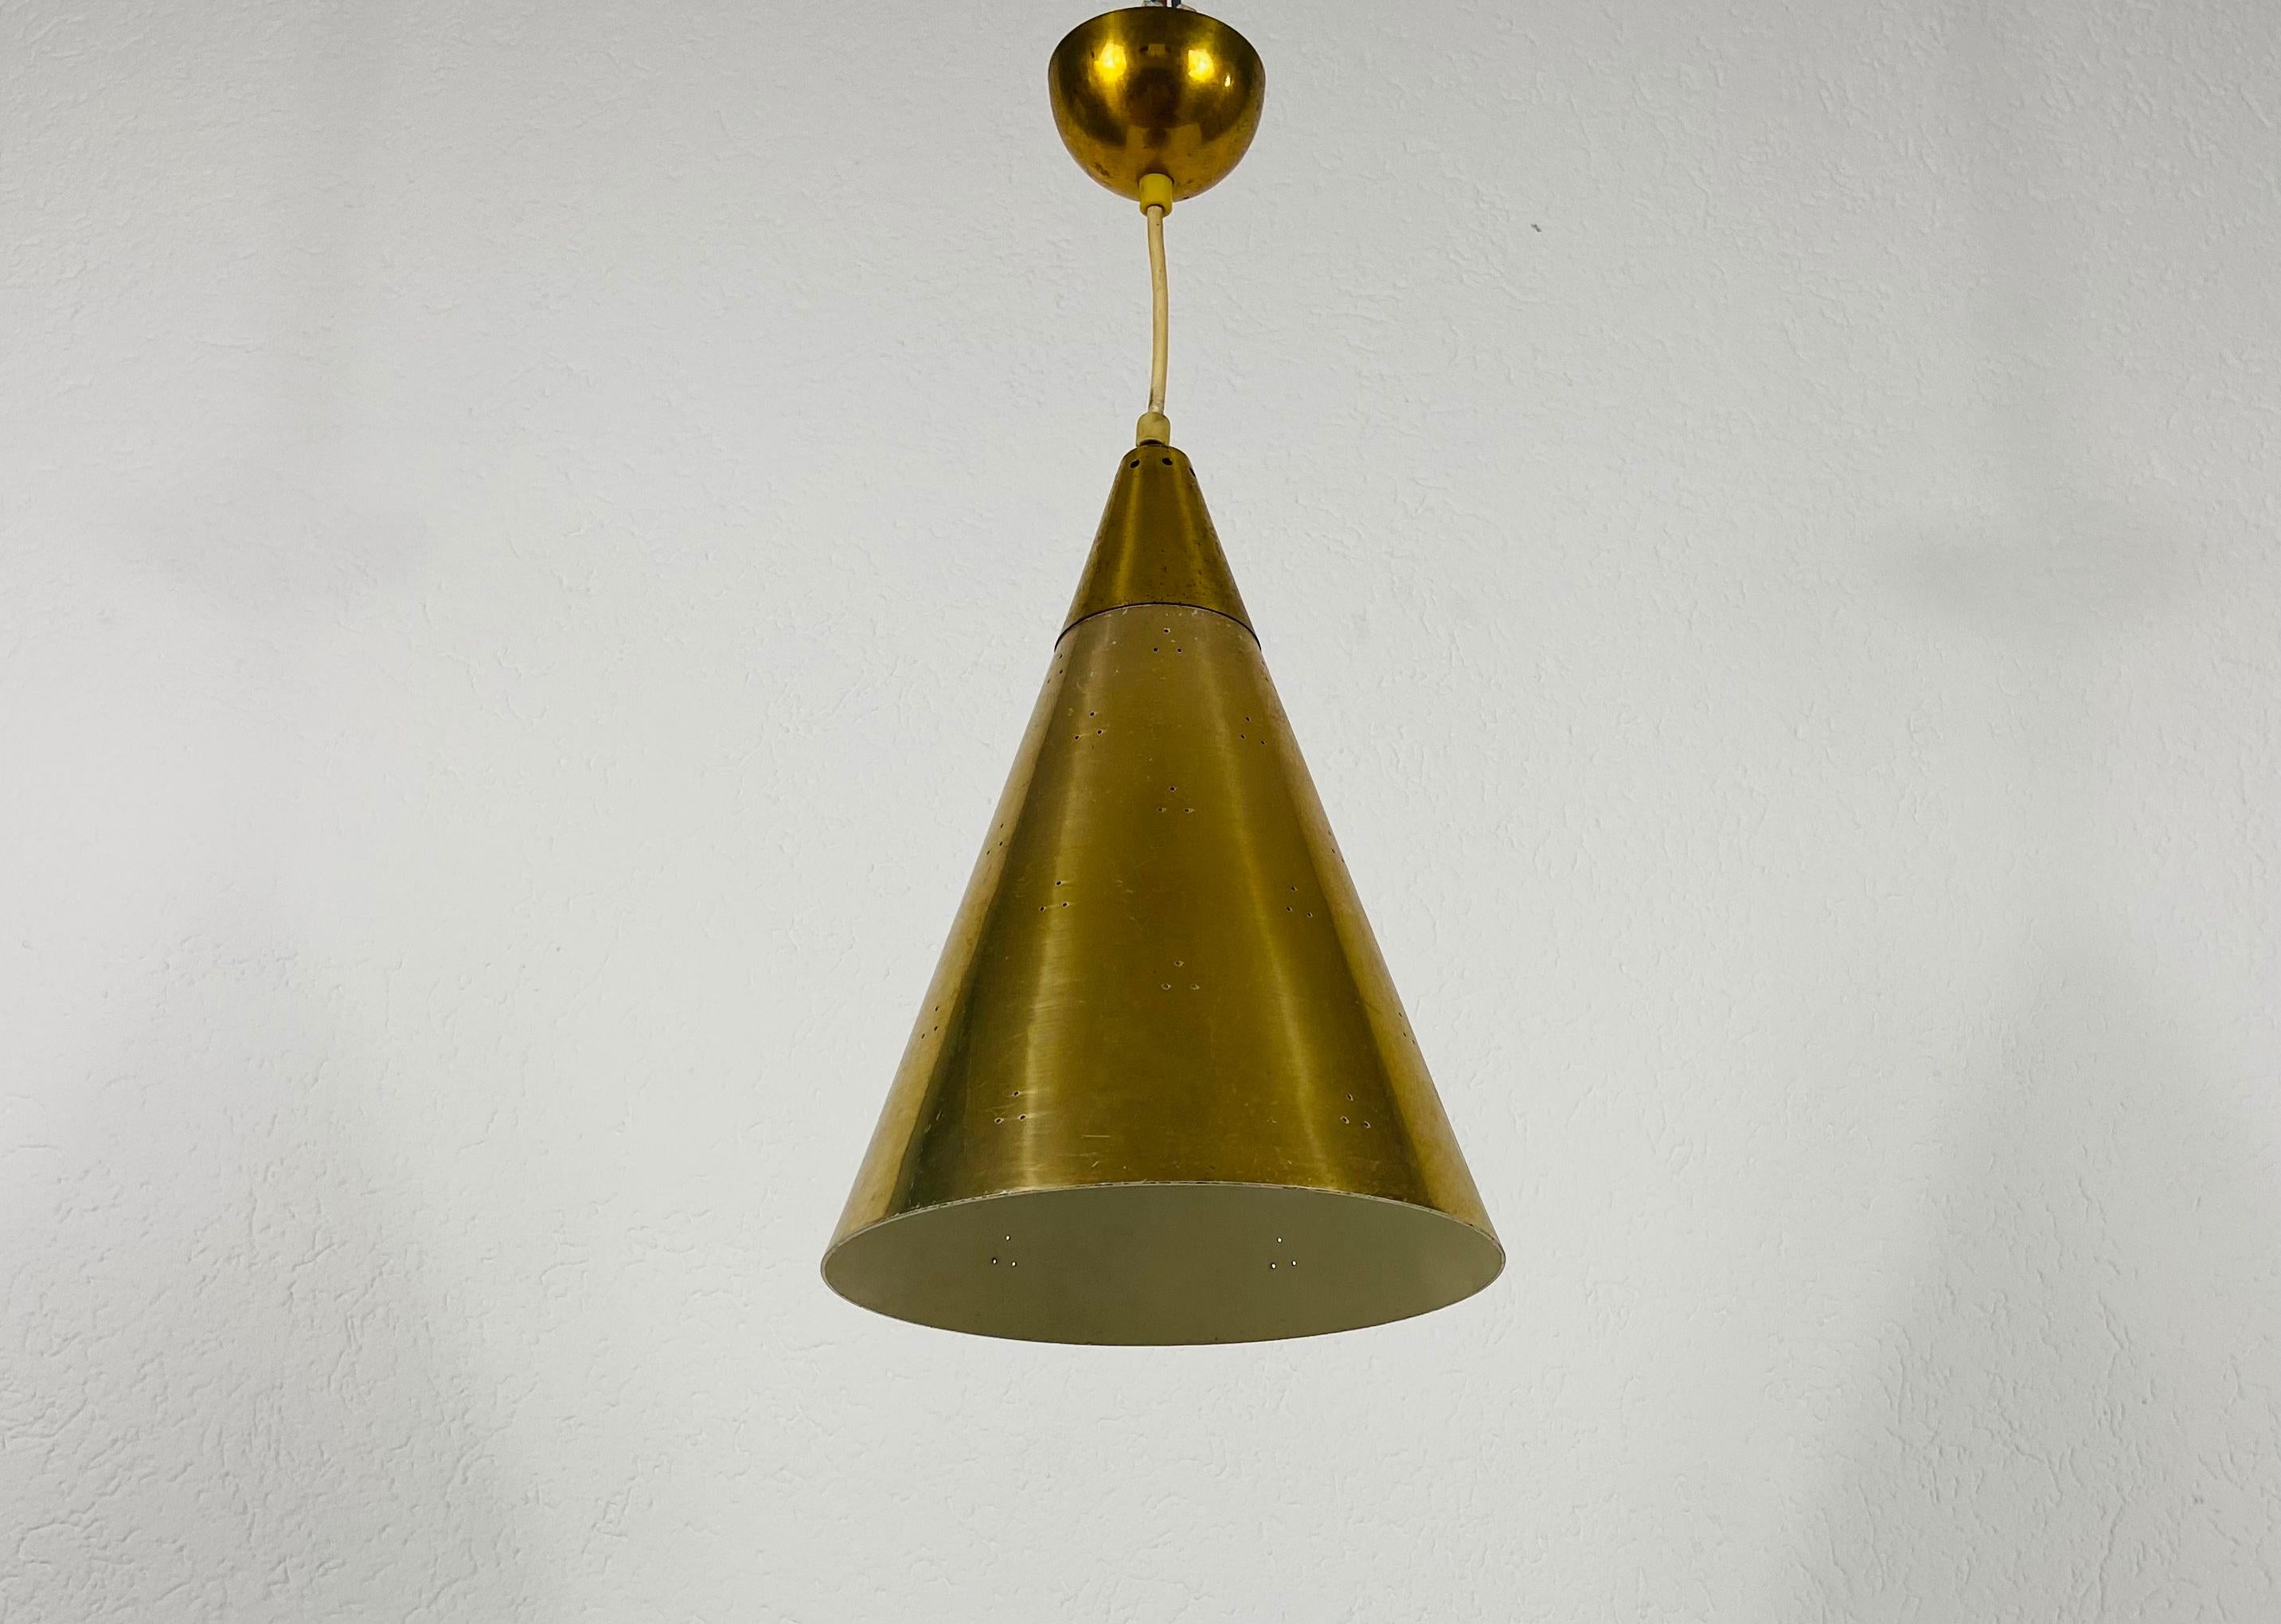 Polished Brass Pendant Lamp in the Style of Paavo Tynell, 1950s For Sale 1